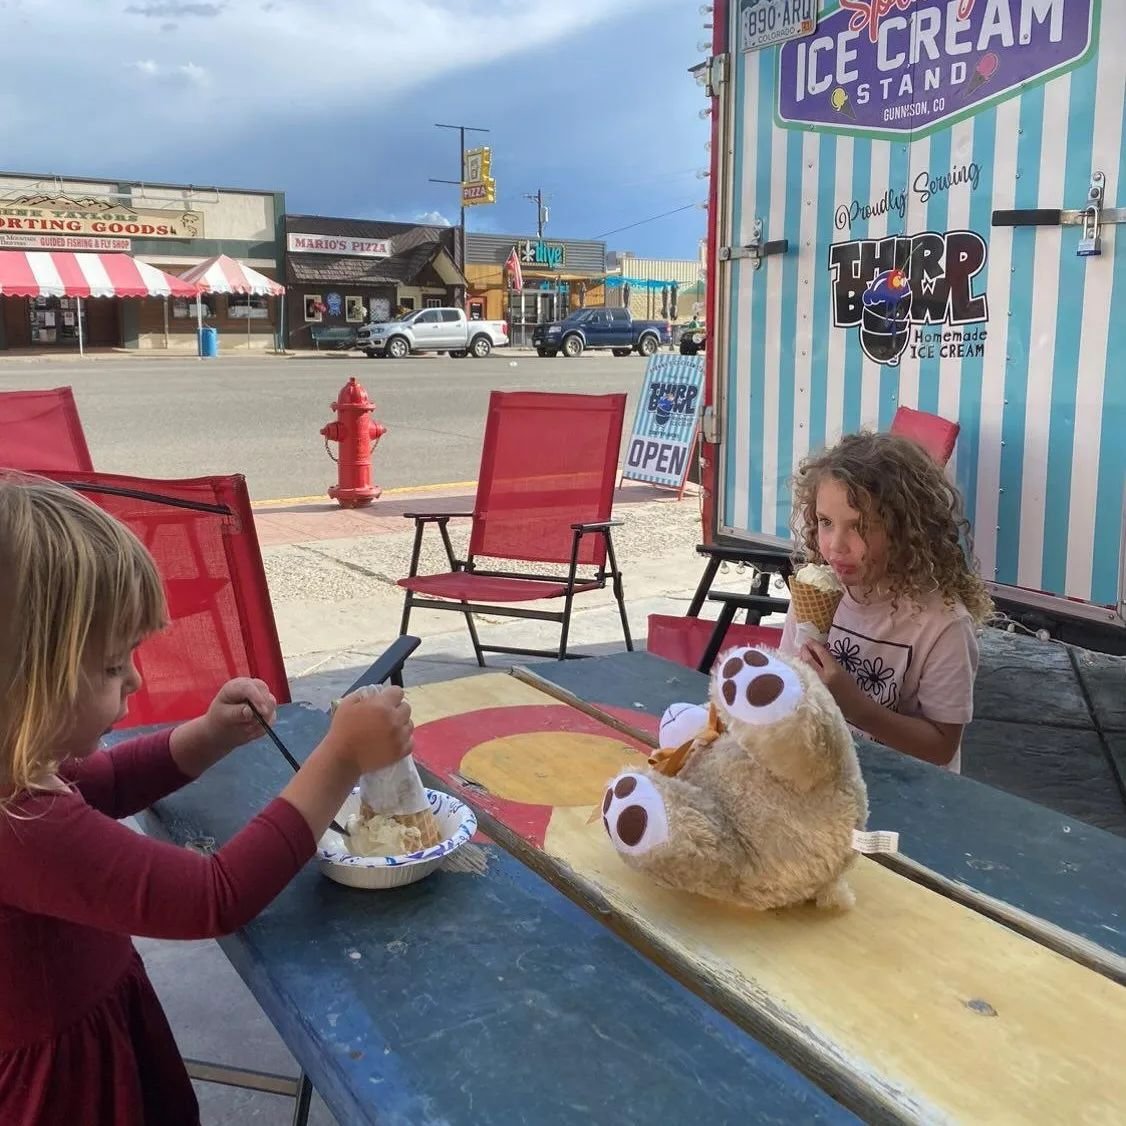 Now that's the perfect start to 🌞 🍦😎

Thanks @rose_and_wildflowers for this shot of @spennys_ice_cream_stand !!!!

#gunnisom #crestedbutte #visitgcb